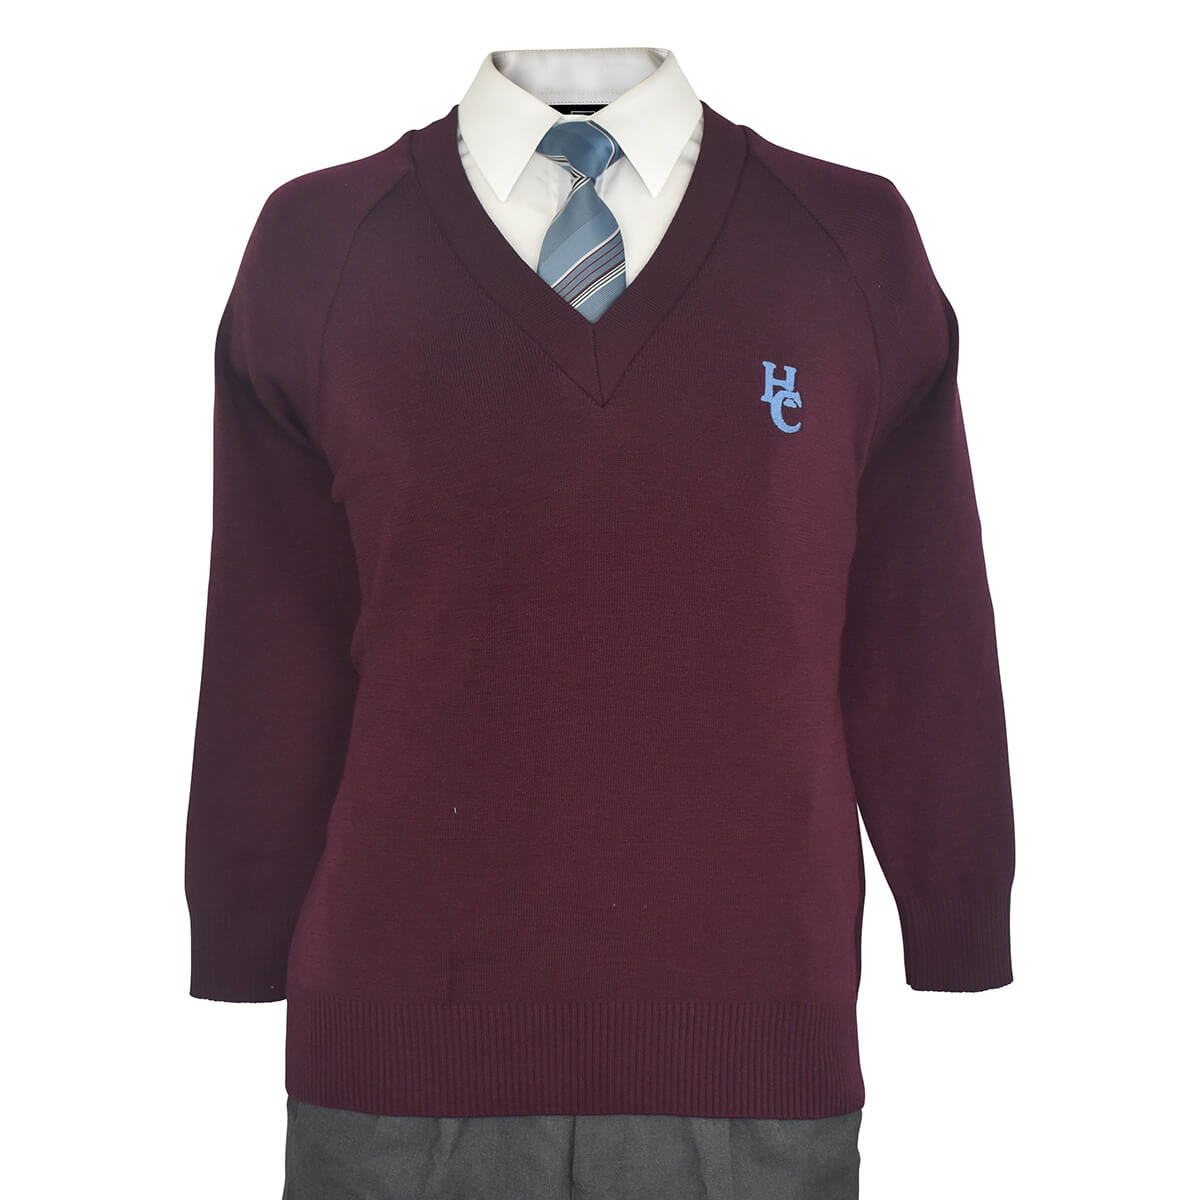 Hoppers Crossing Pullover VCE | Hoppers Crossing Secondary College | Noone